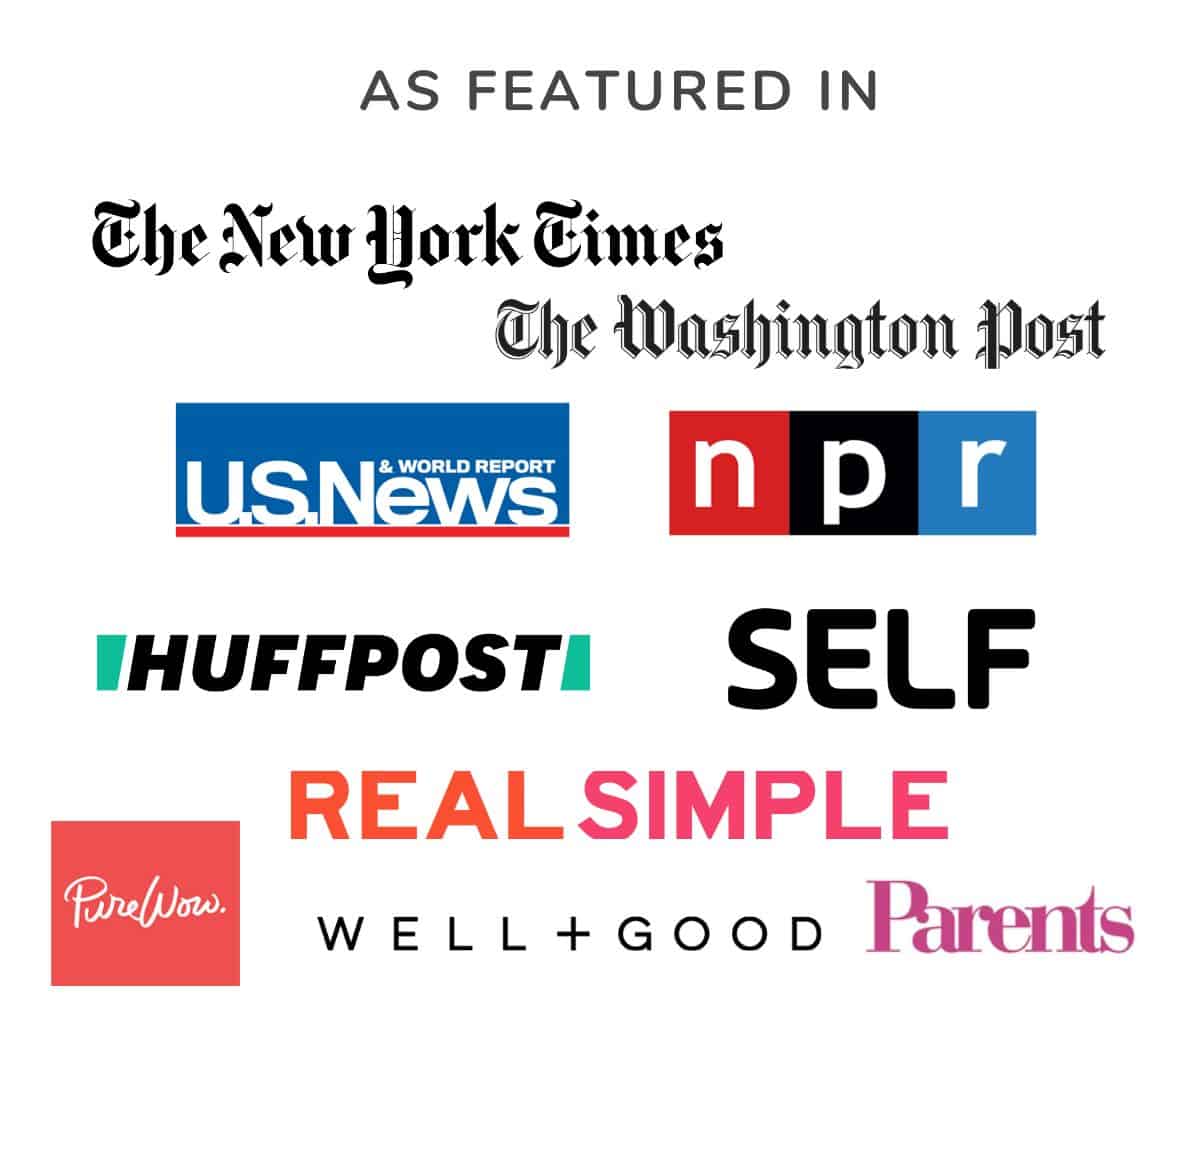 As Featured In block contains the following logos: New York Times, Washington Post, US News, NPR, HuffPost, Self, Real Simple, Well + Good, Pure Wow, and Parents.